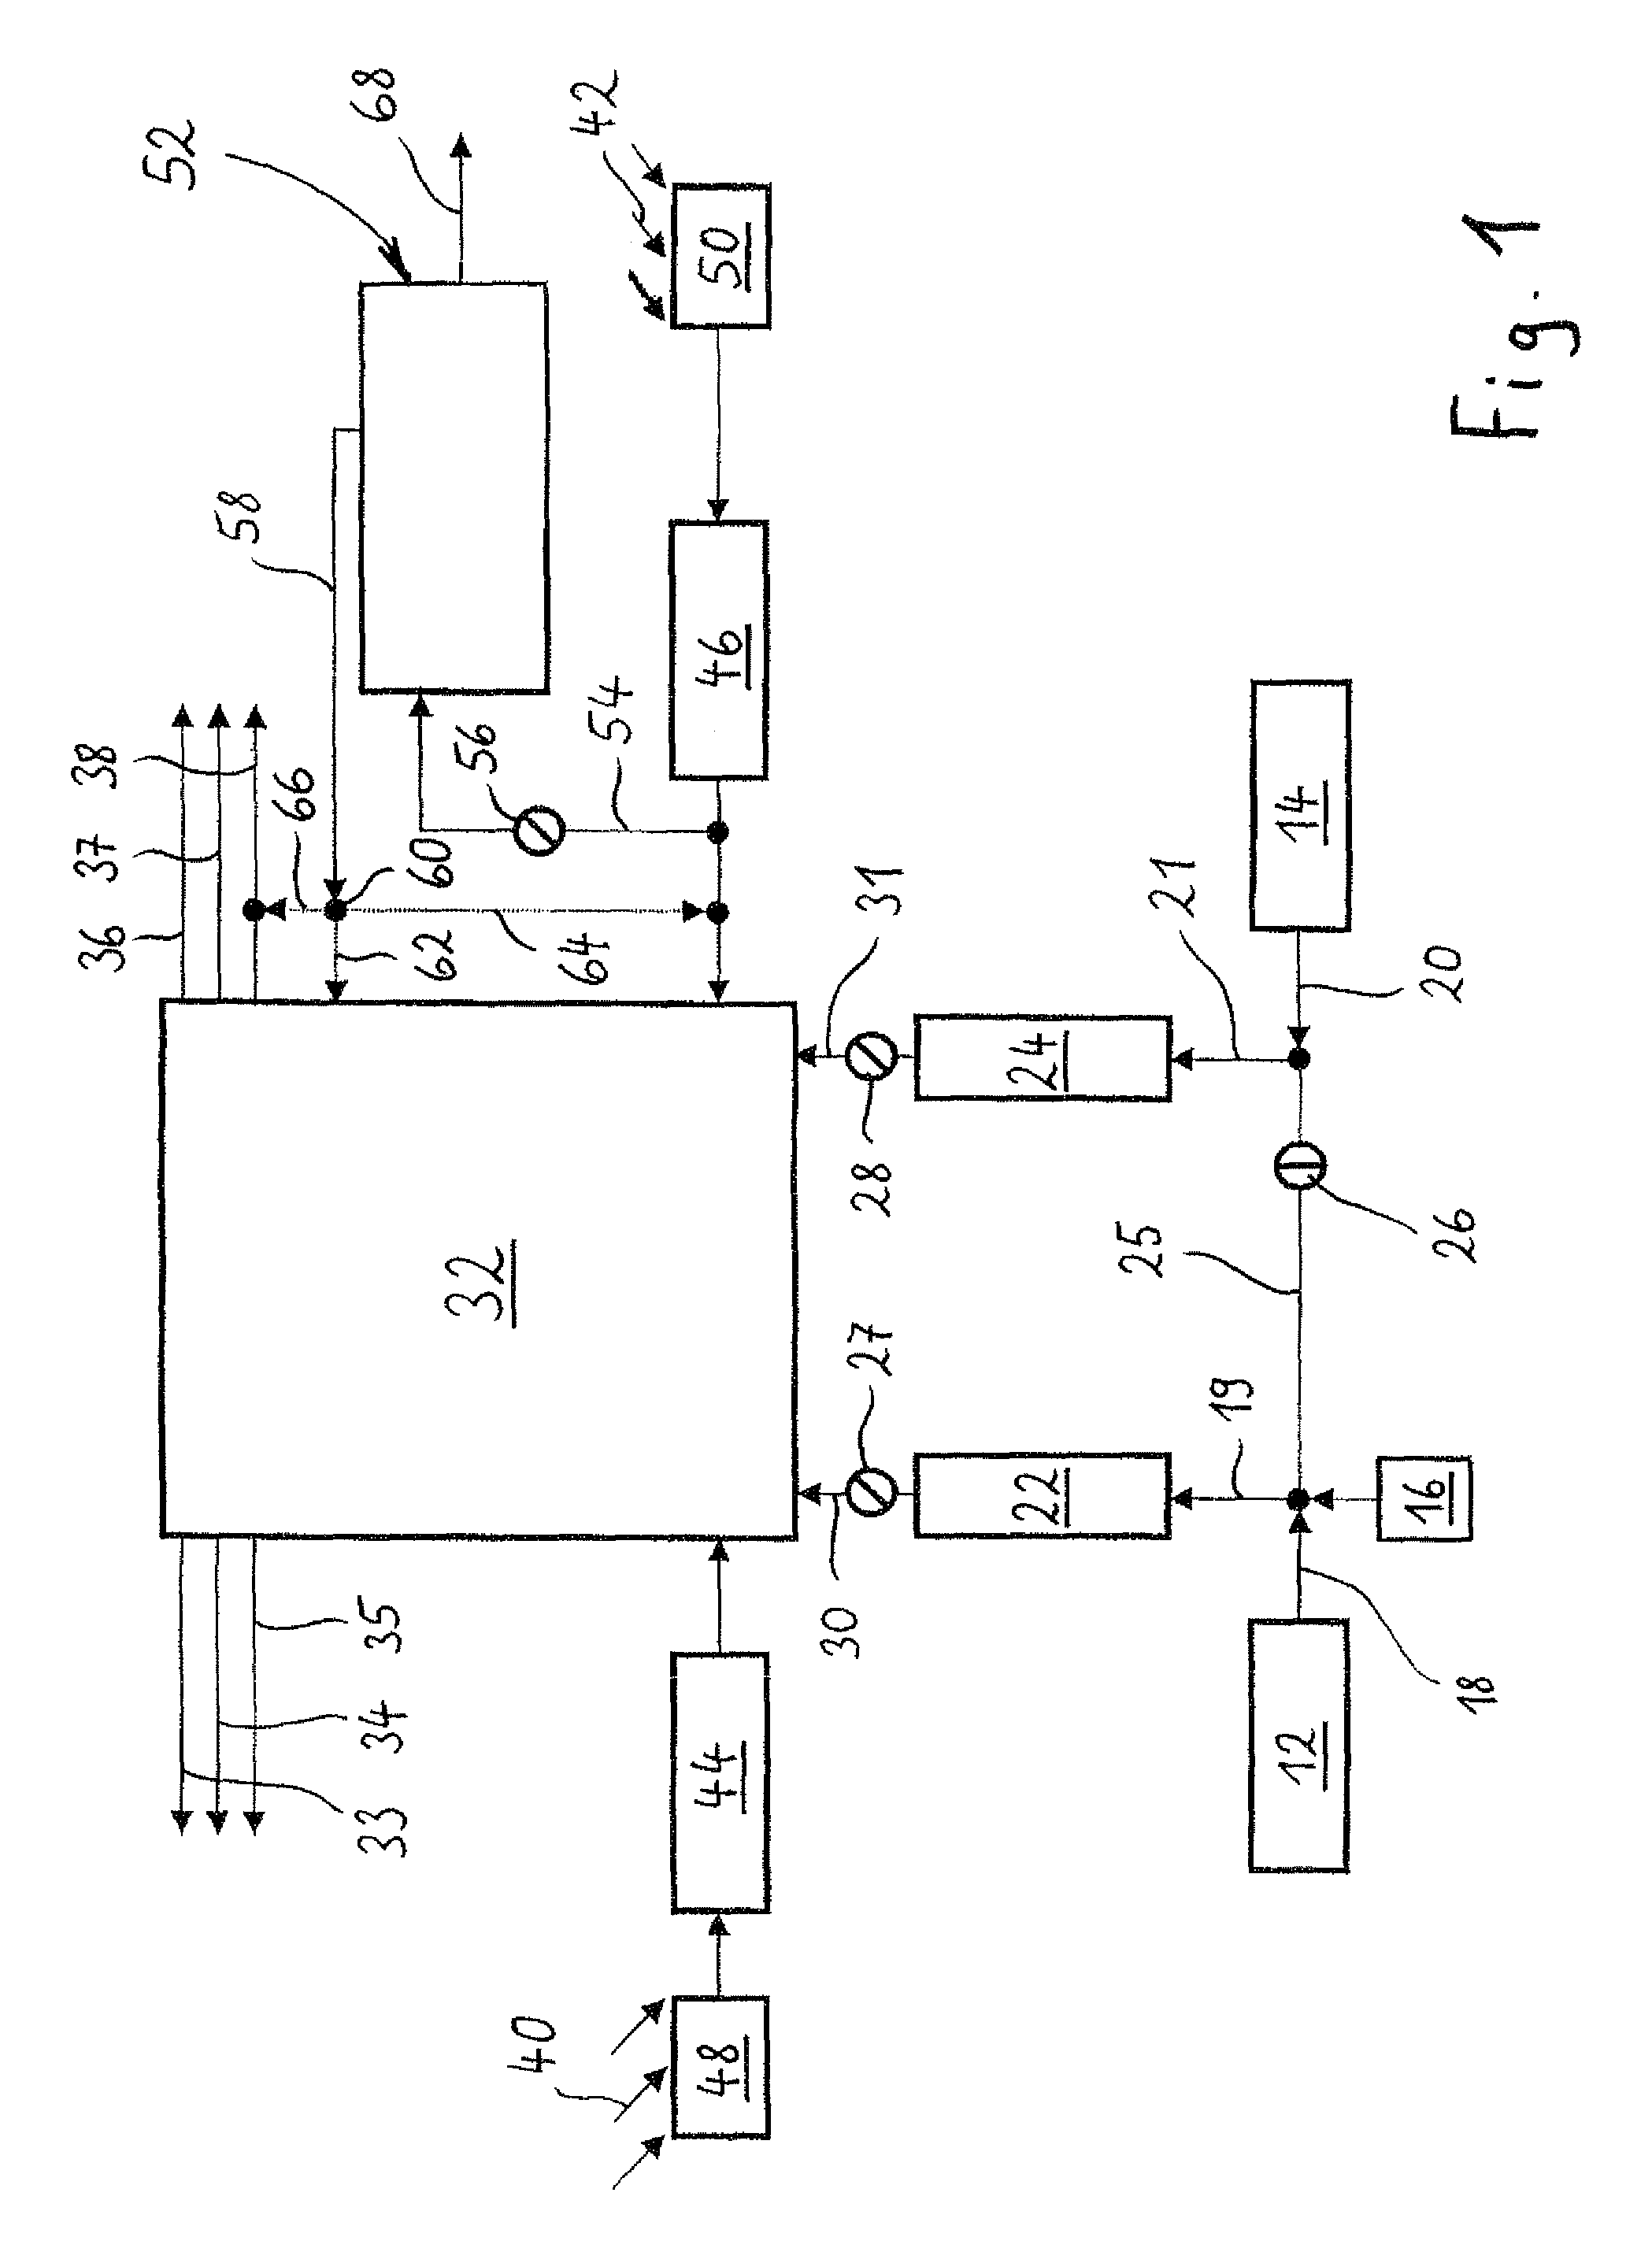 System for improving air quality in an aircraft pressure cabin